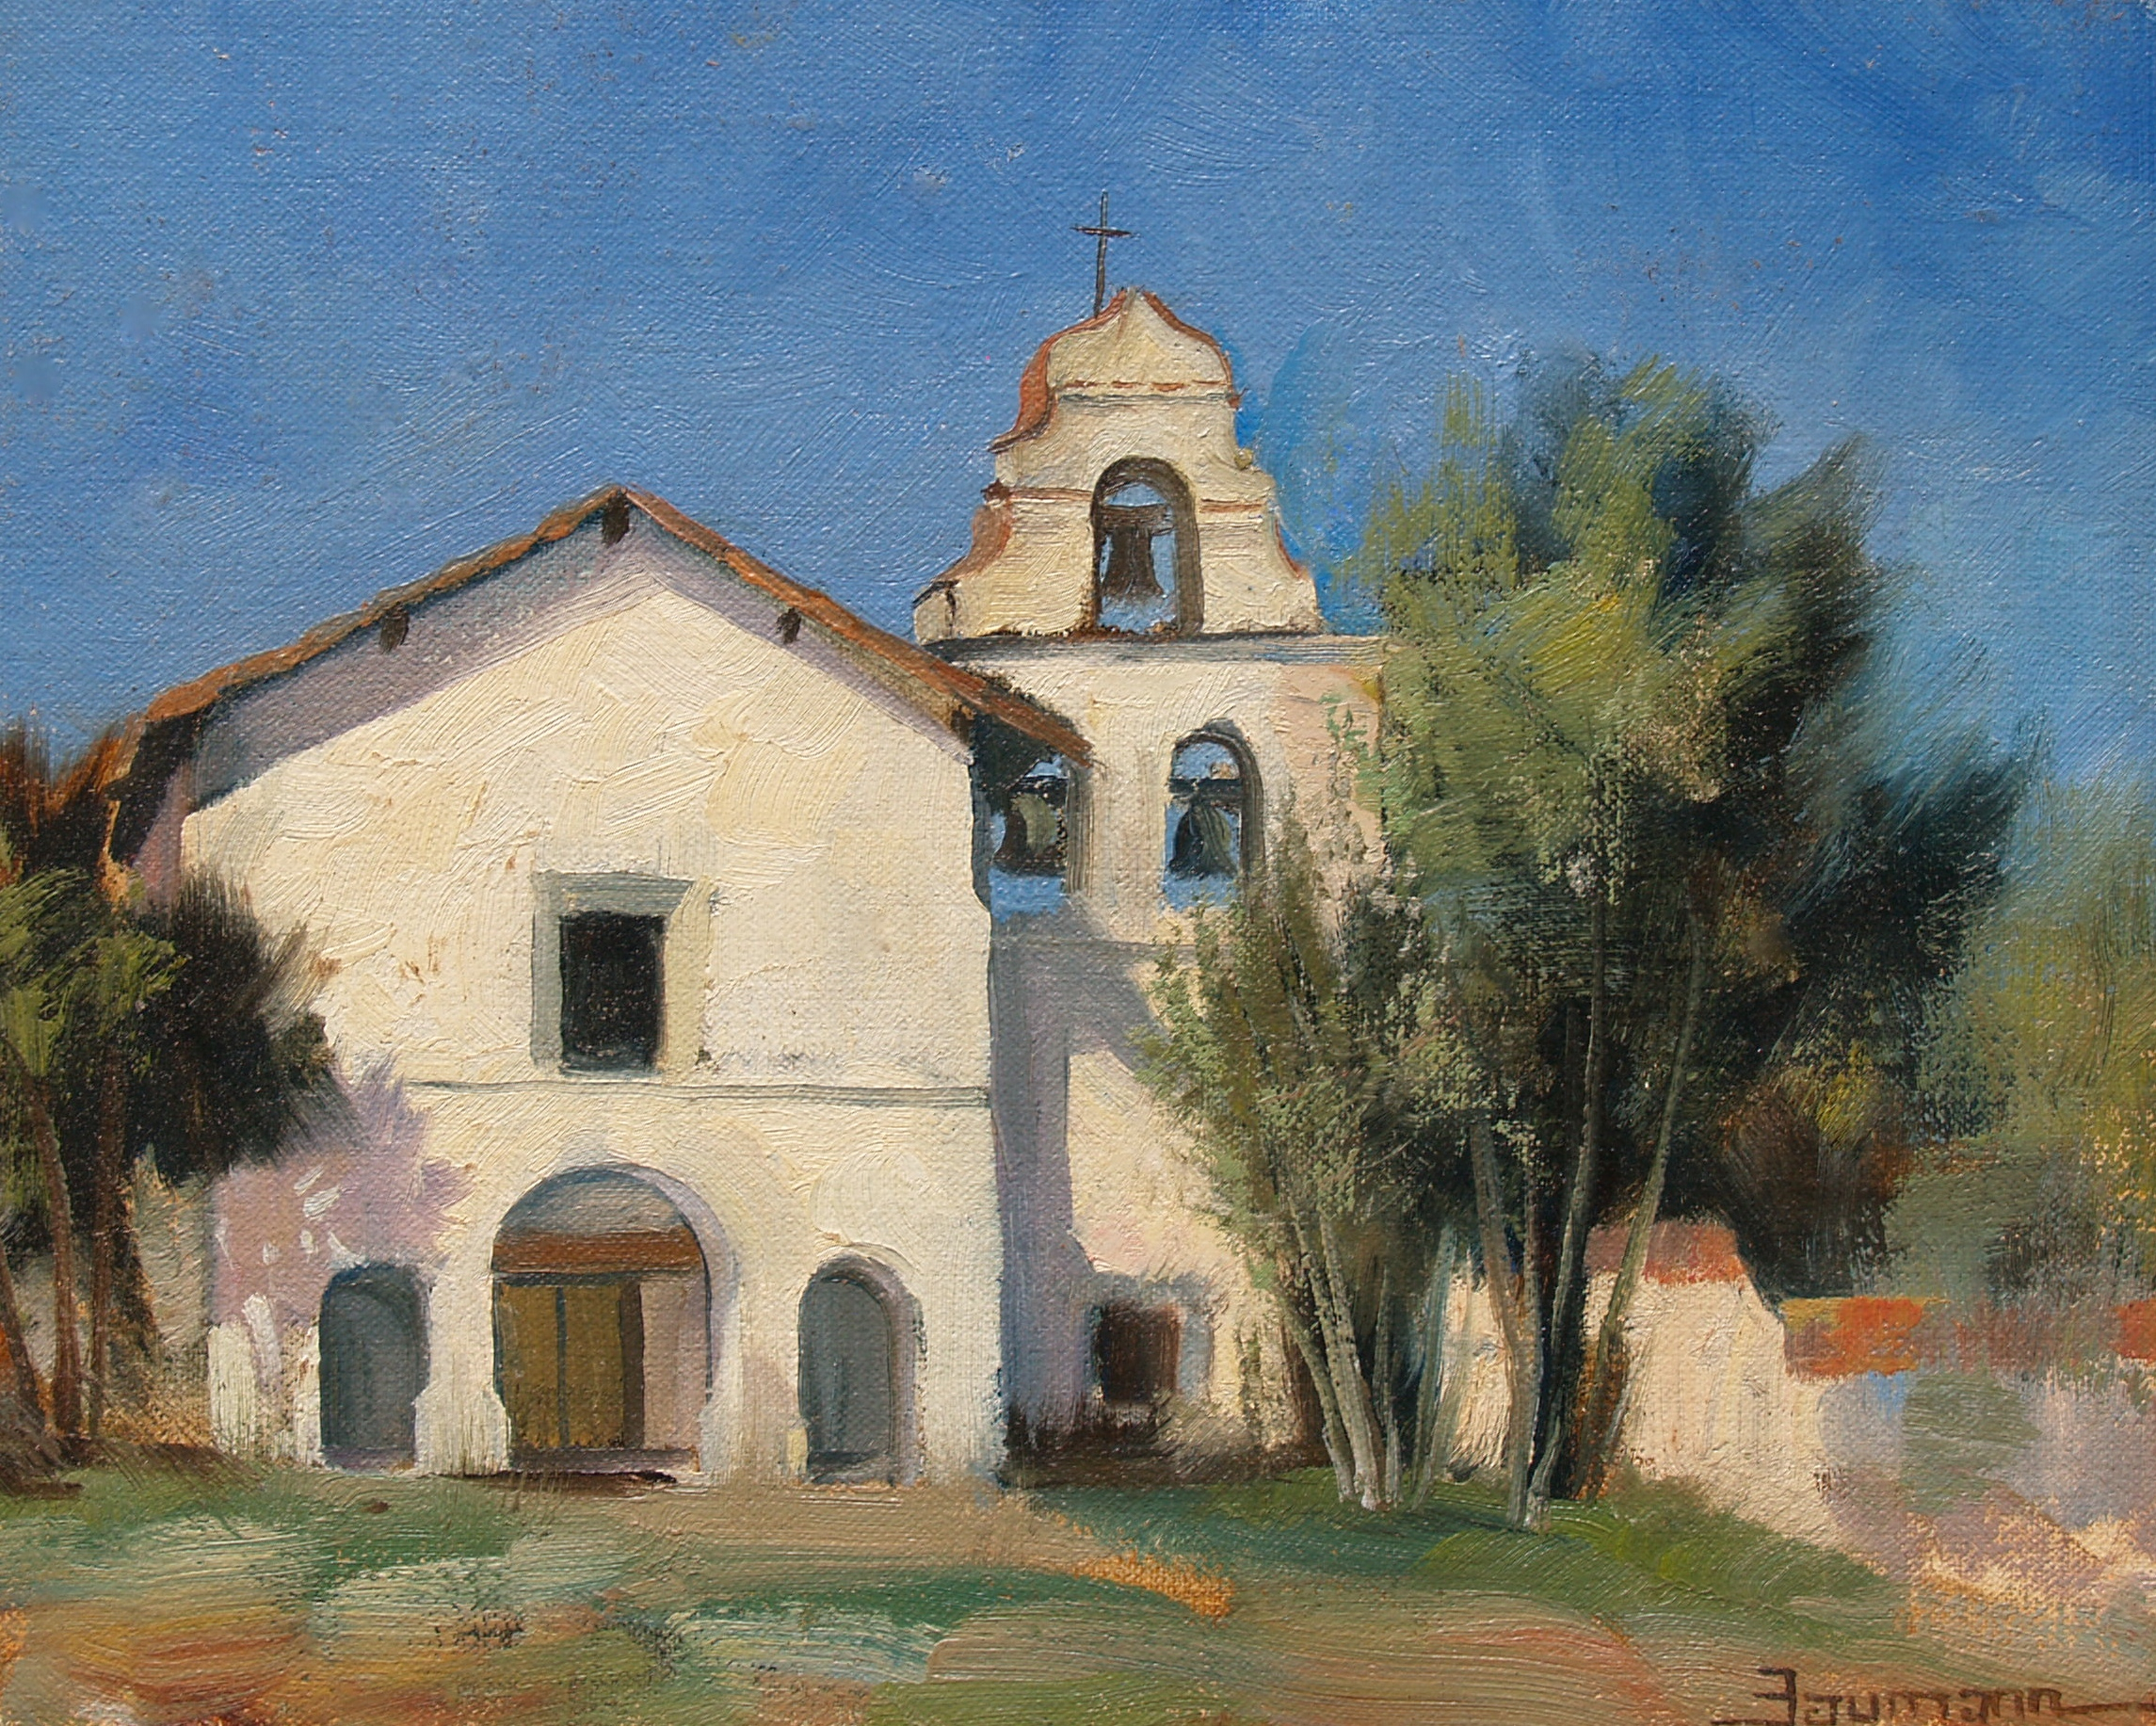 This is a painting of Mission San Juan Bautista painted plein air in morning light by Stefan Baumann.